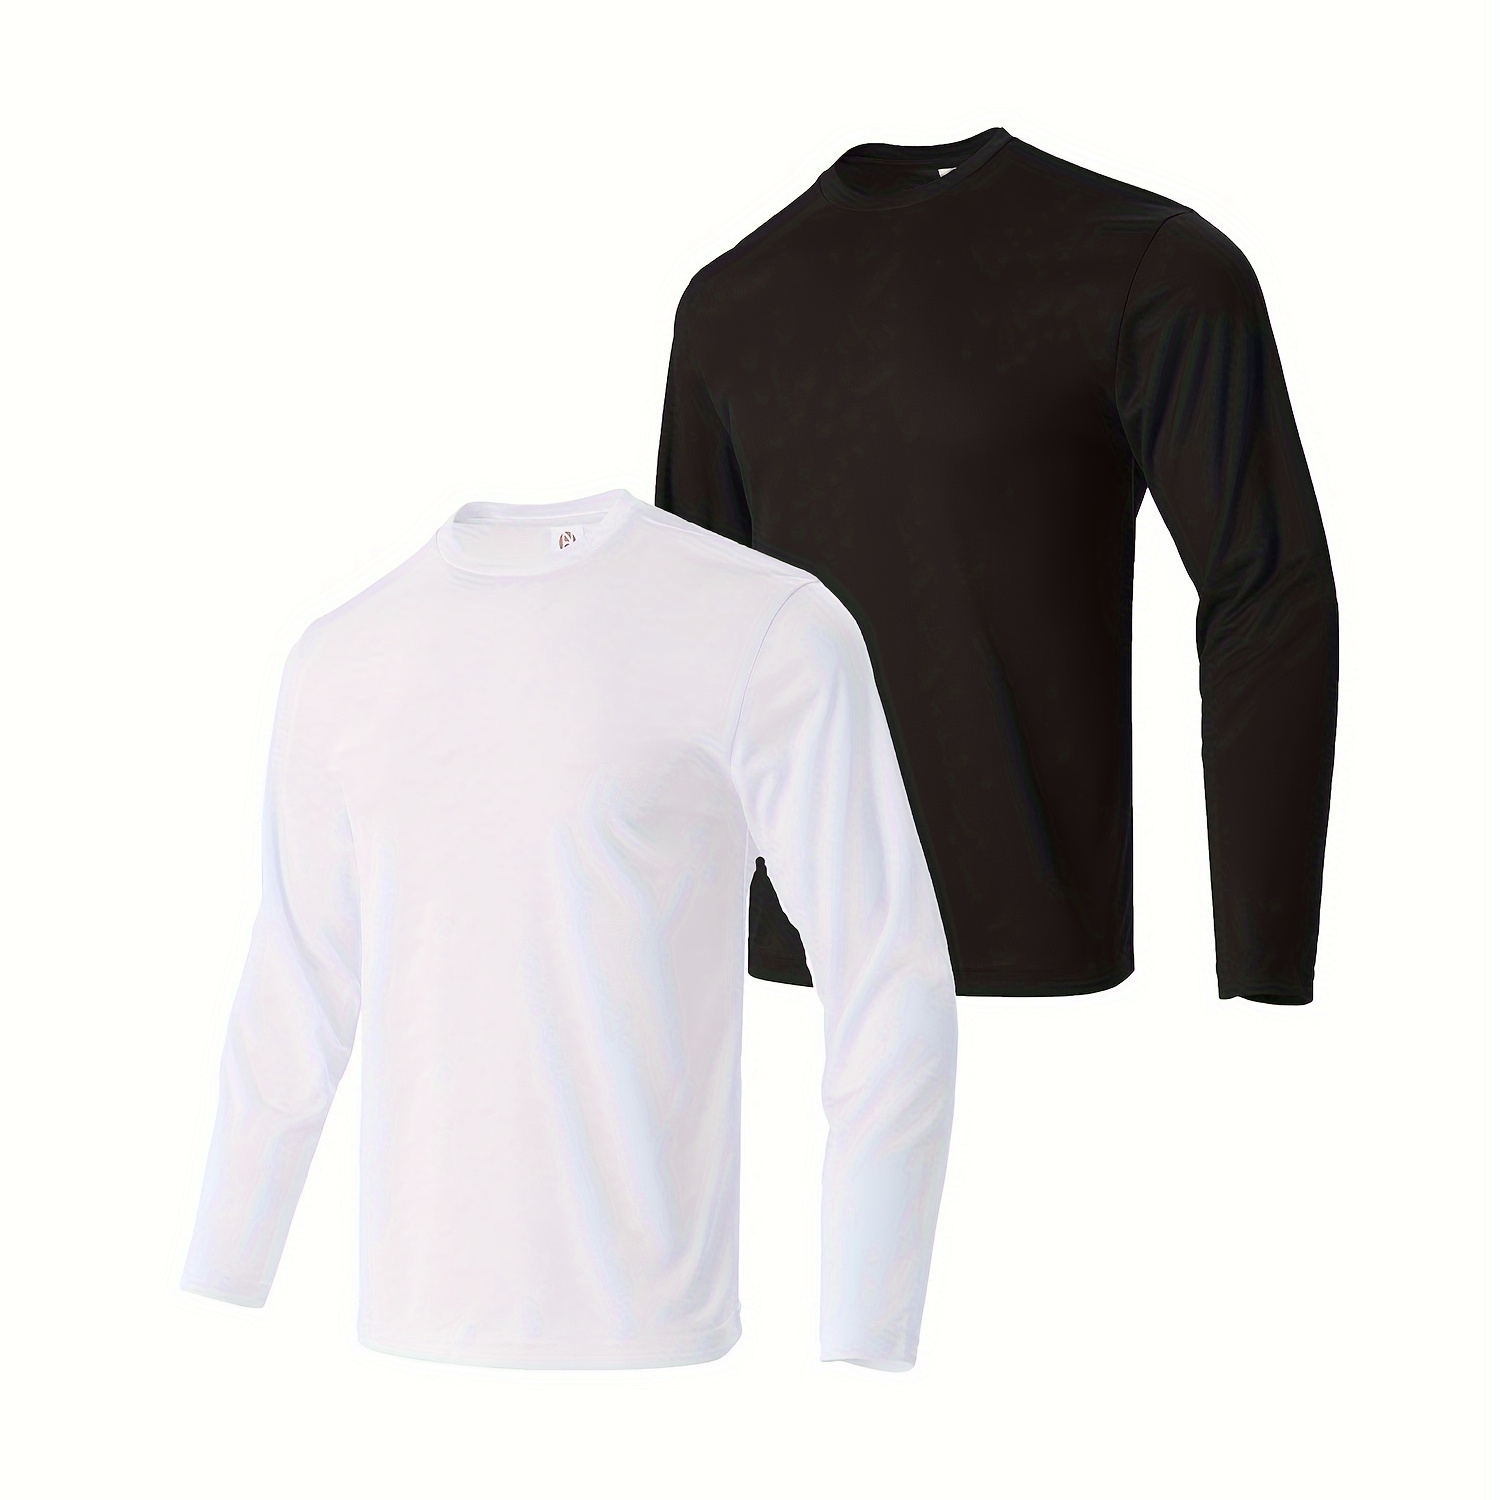 

Men's 2-pack Set Of Regular Fit Solid Color Crew Neck Long Sleeve T-shirts, Quick Dry Breathable And Comfy Sports Tops For Sports Wear And Outdoors Activities